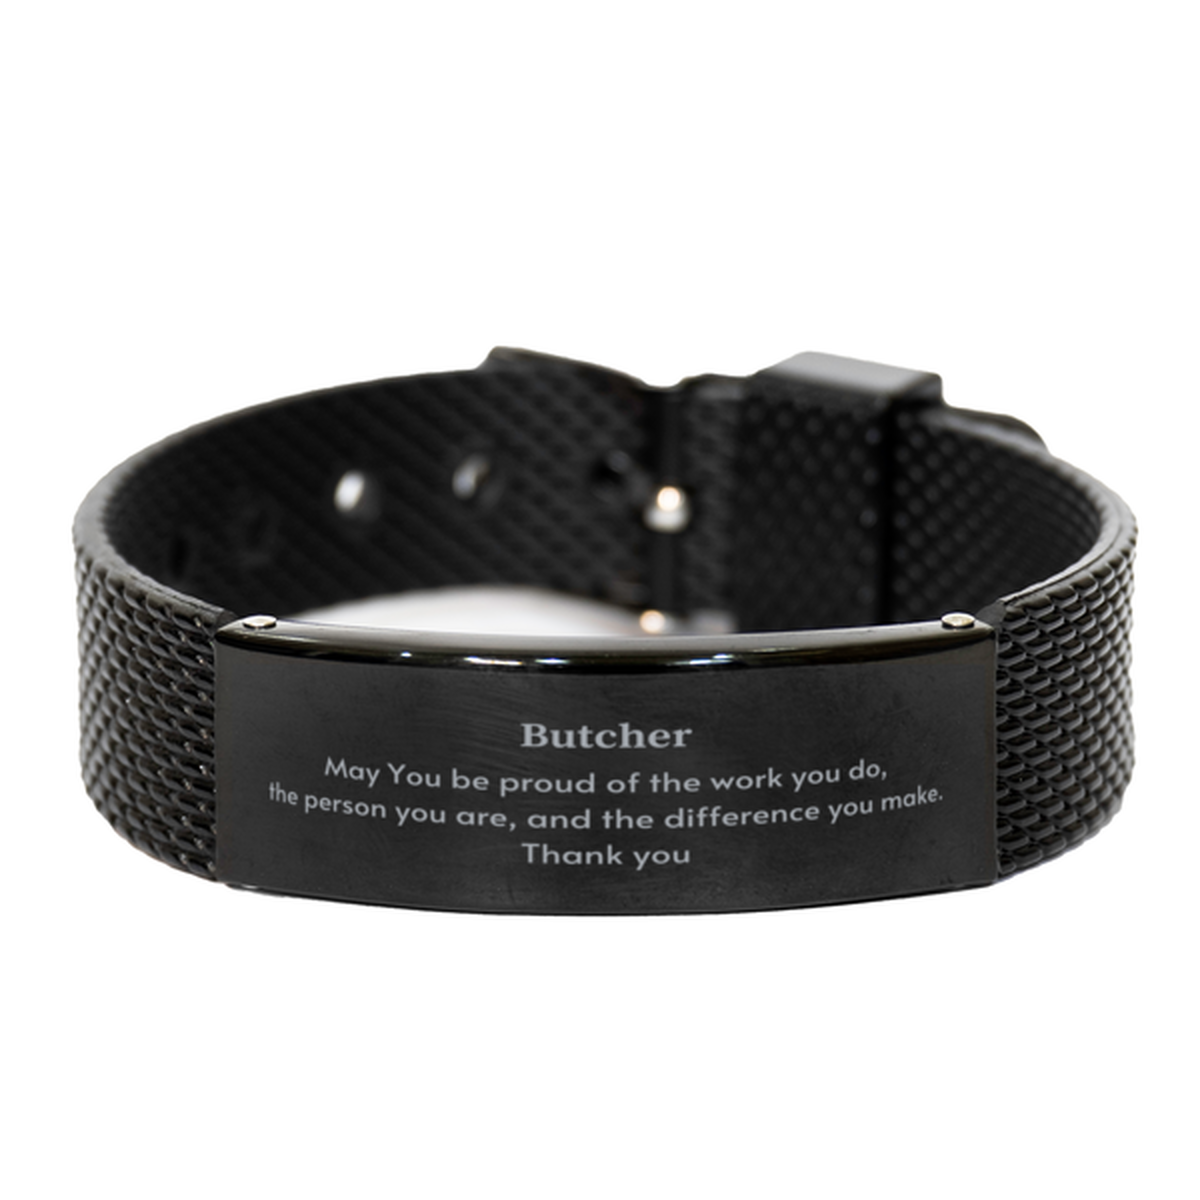 Heartwarming Black Shark Mesh Bracelet Retirement Coworkers Gifts for Butcher, Butcher May You be proud of the work you do, the person you are Gifts for Boss Men Women Friends